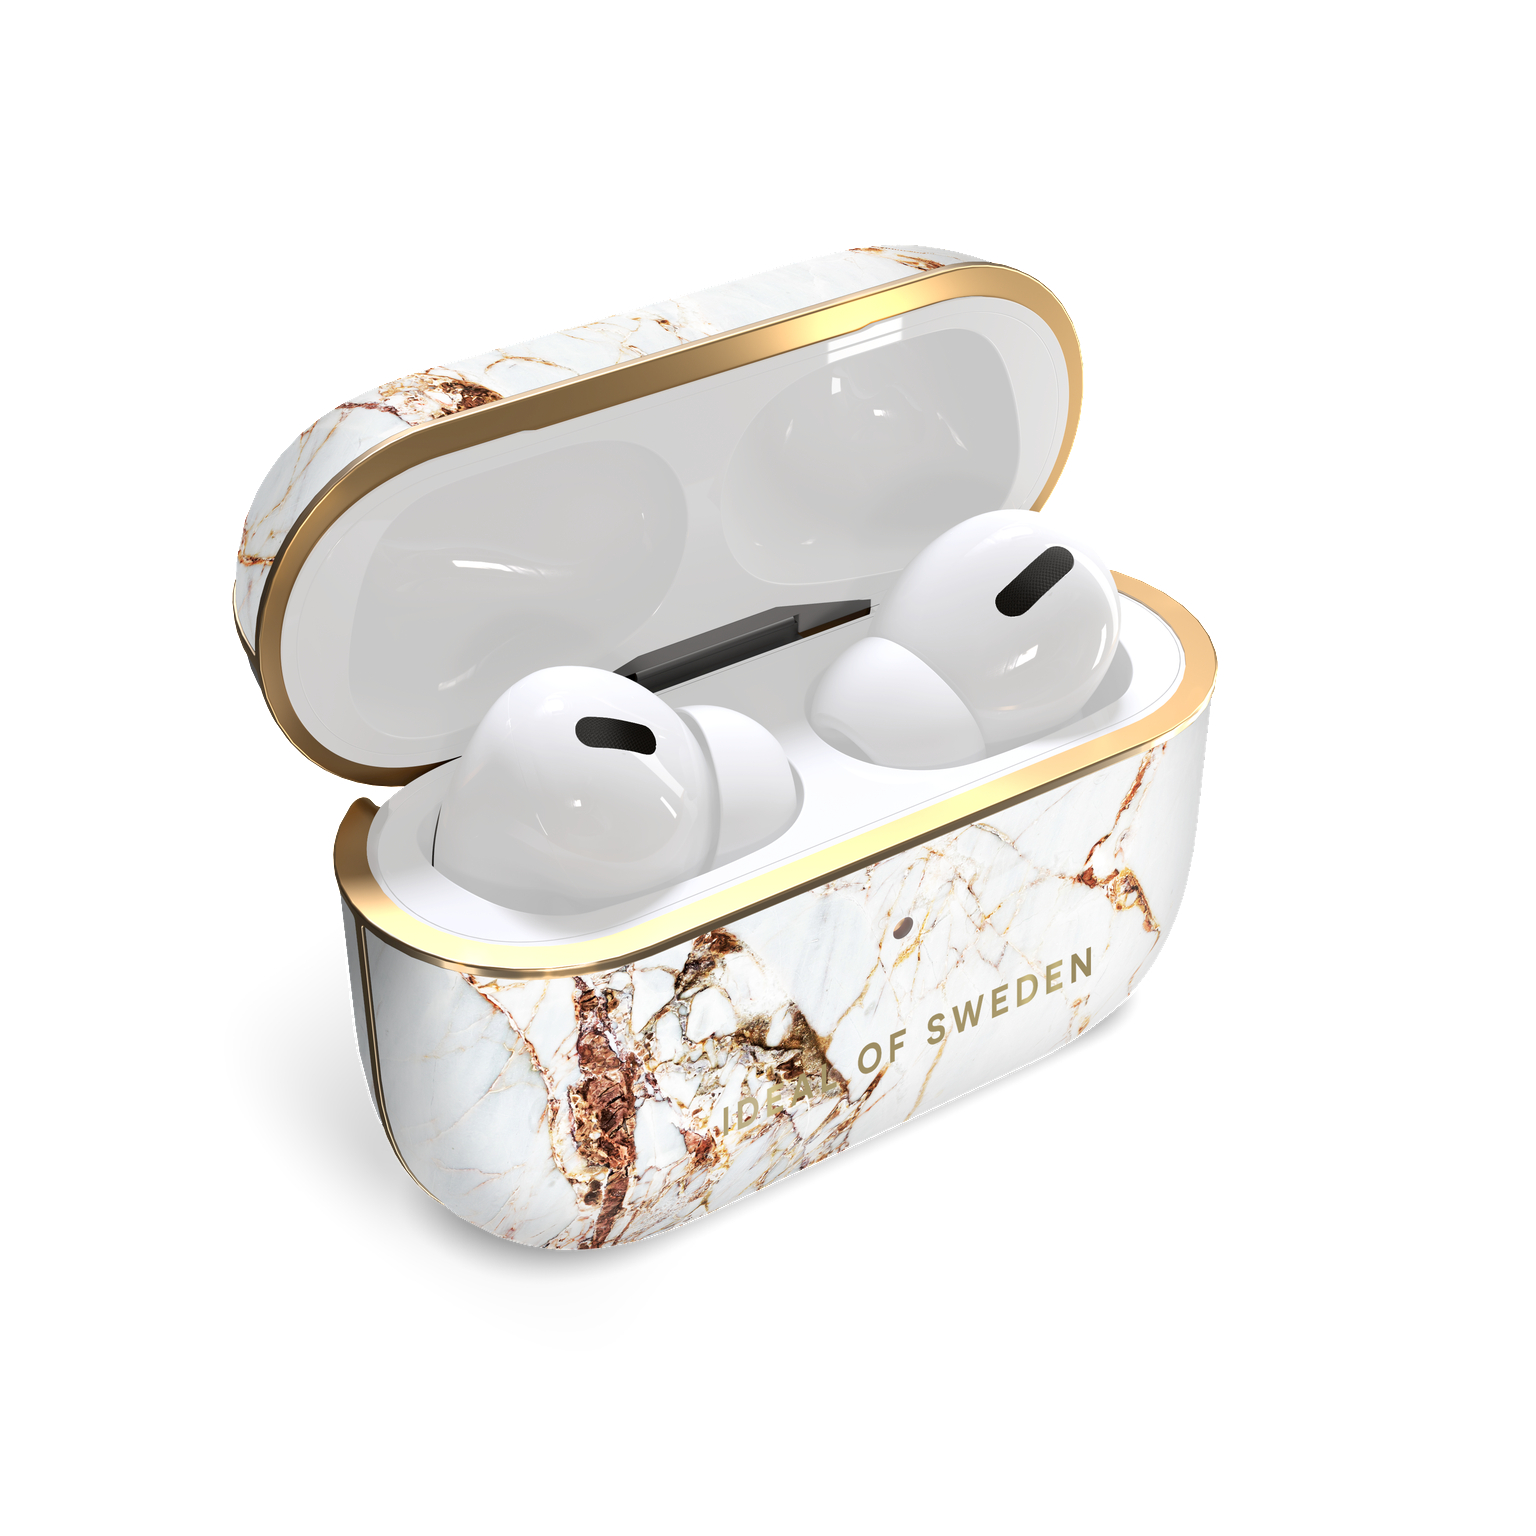 SWEDEN Case AirPod IDFAPC-PRO-46 OF IDEAL